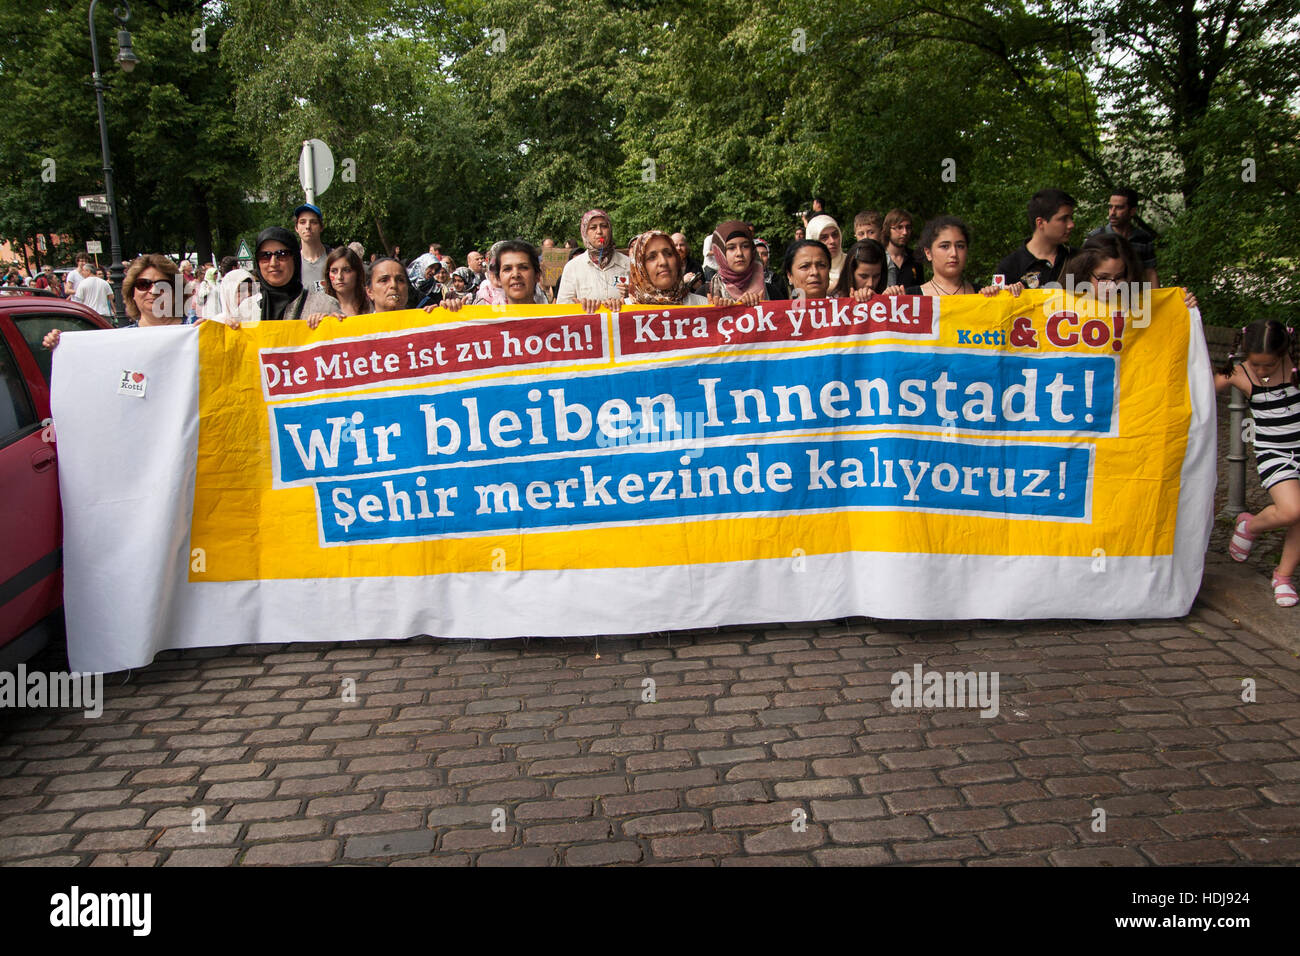 Demonstration against rising rents by Kotti & Co., a community of tenants at Kottbusser Tor. Berlin, Germany. Stock Photo